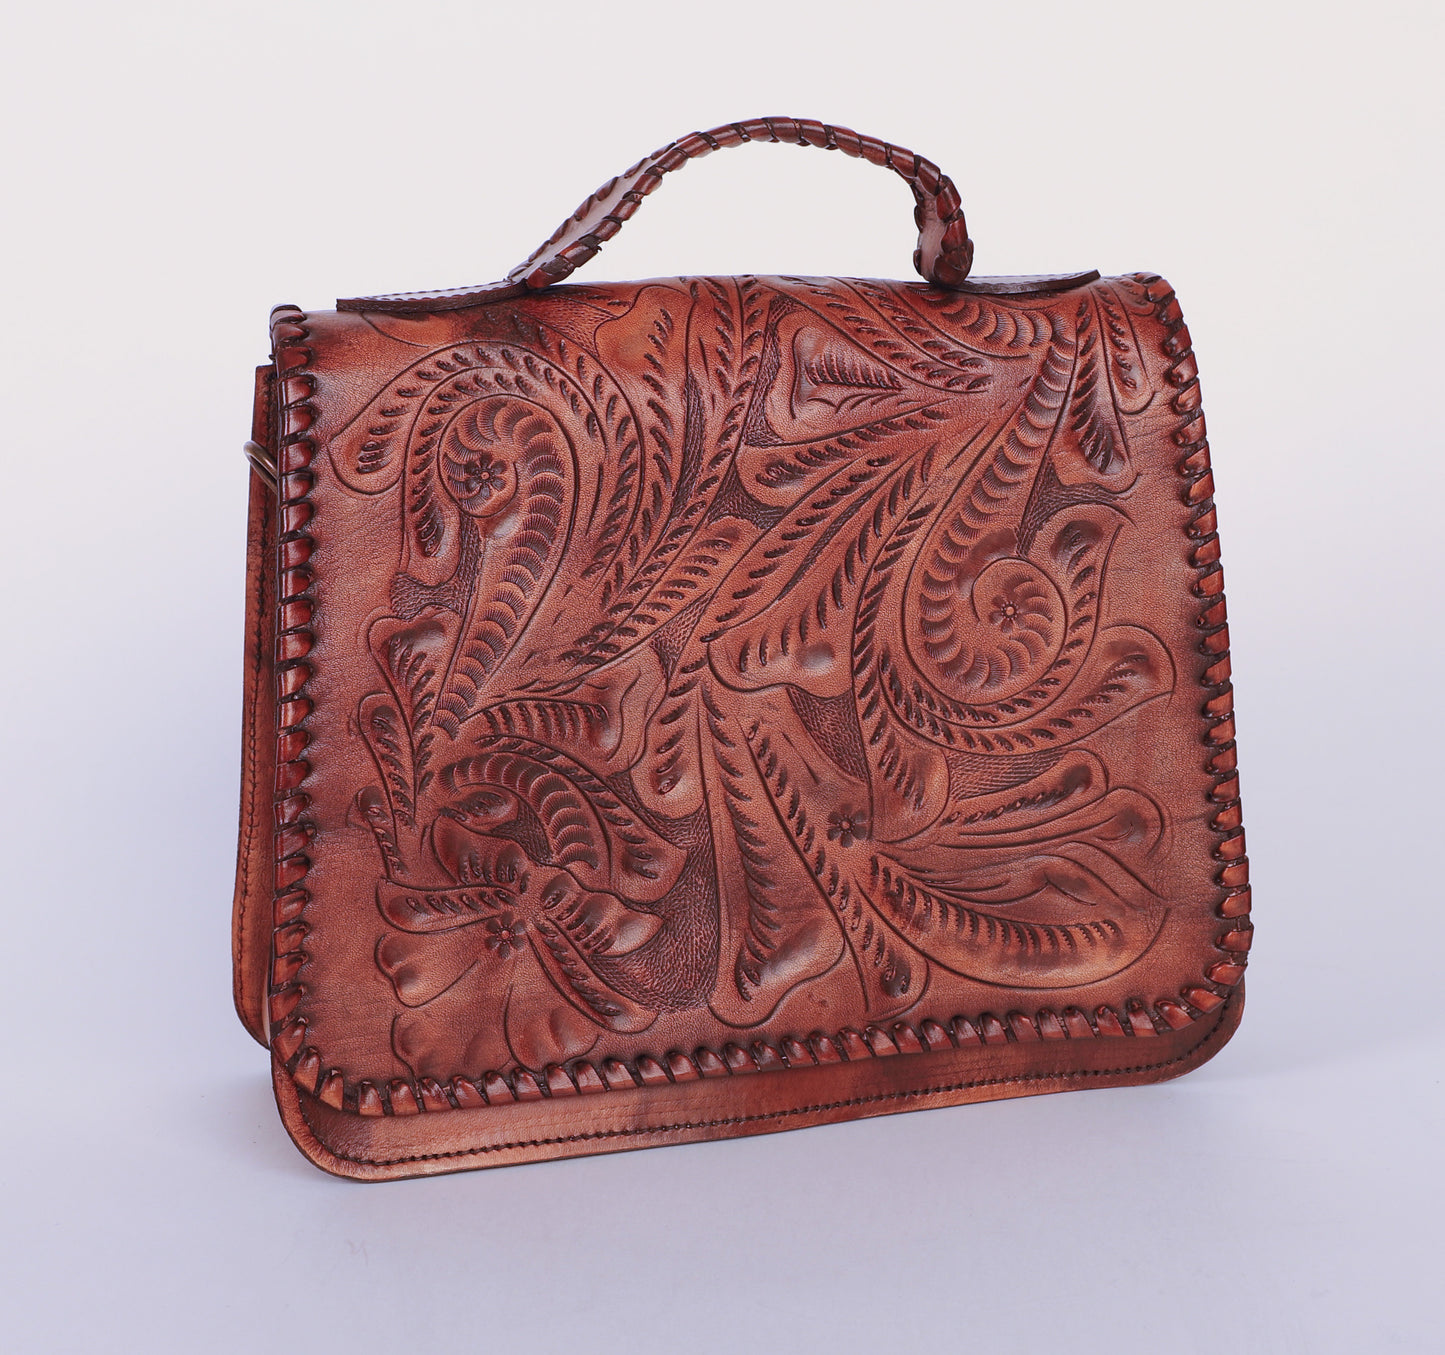 Medium-sized full leather handbag with a traditional mexican etching design on the upper flap. Braided handle on top. Fully lined with suede.  Front view in camel color.